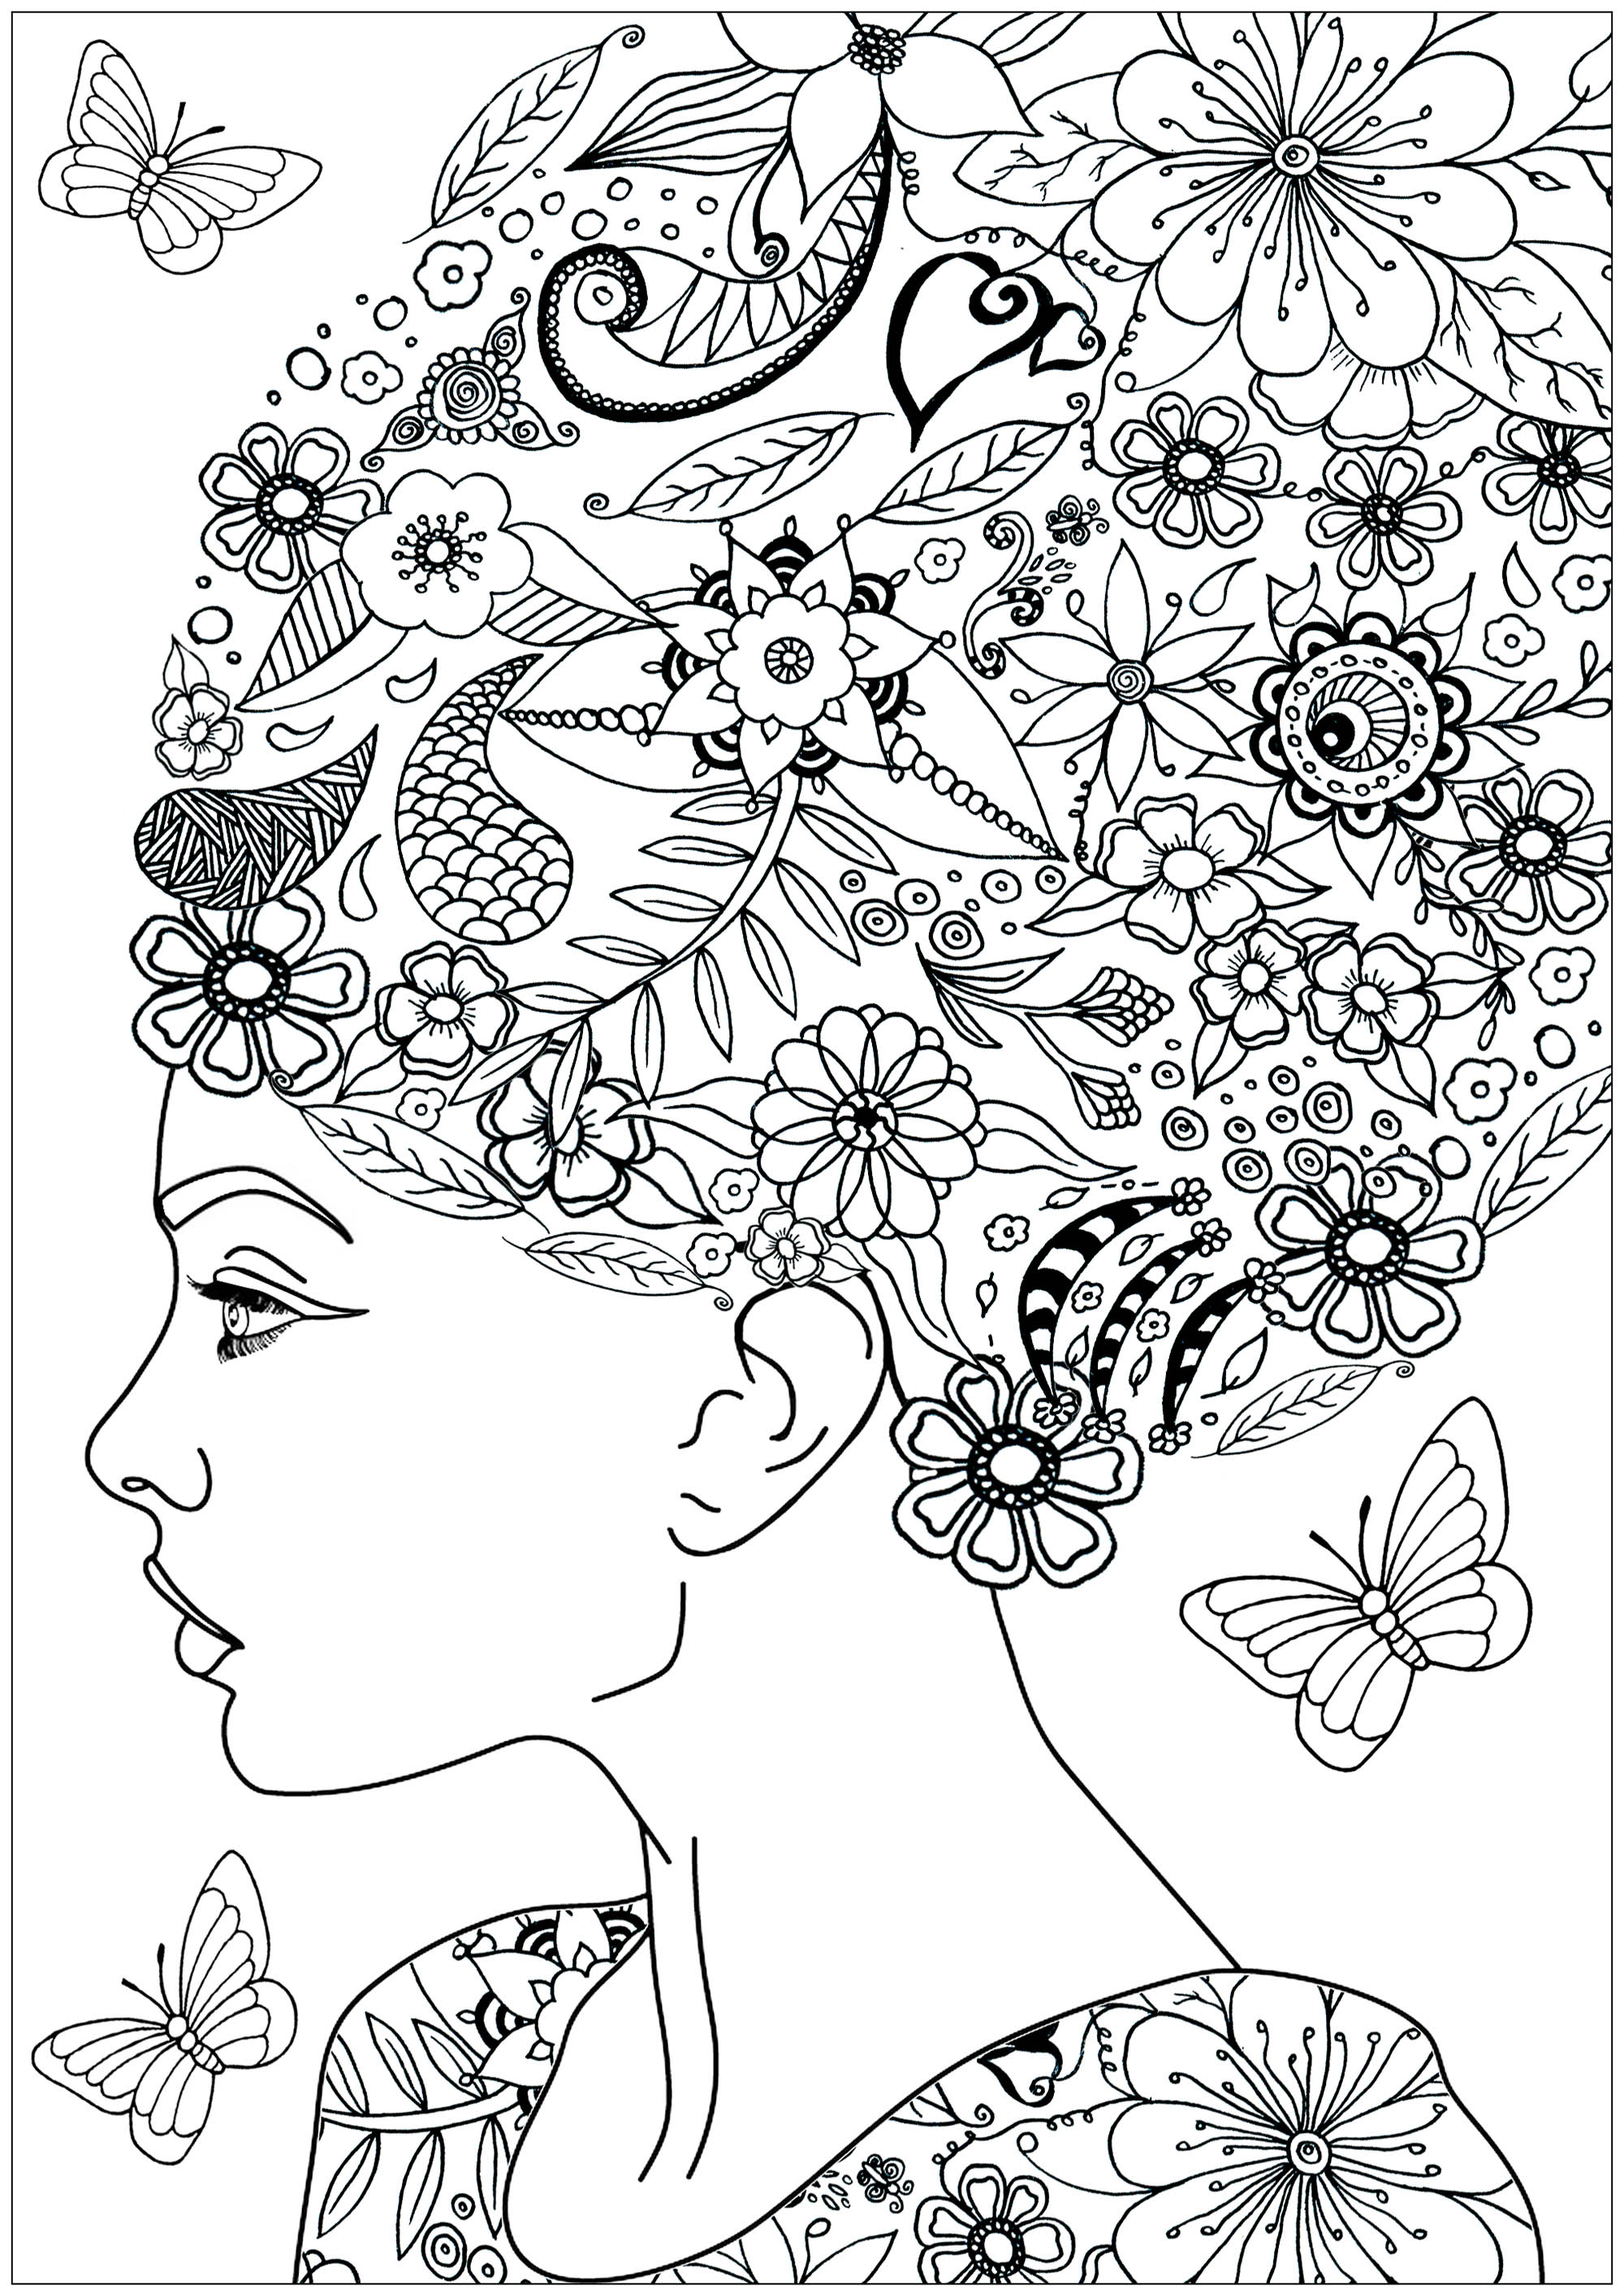 Color the beautiful flowers and leaves in this woman's hair ... and the tree butterflies flying around her, Artist : Art. Isabelle